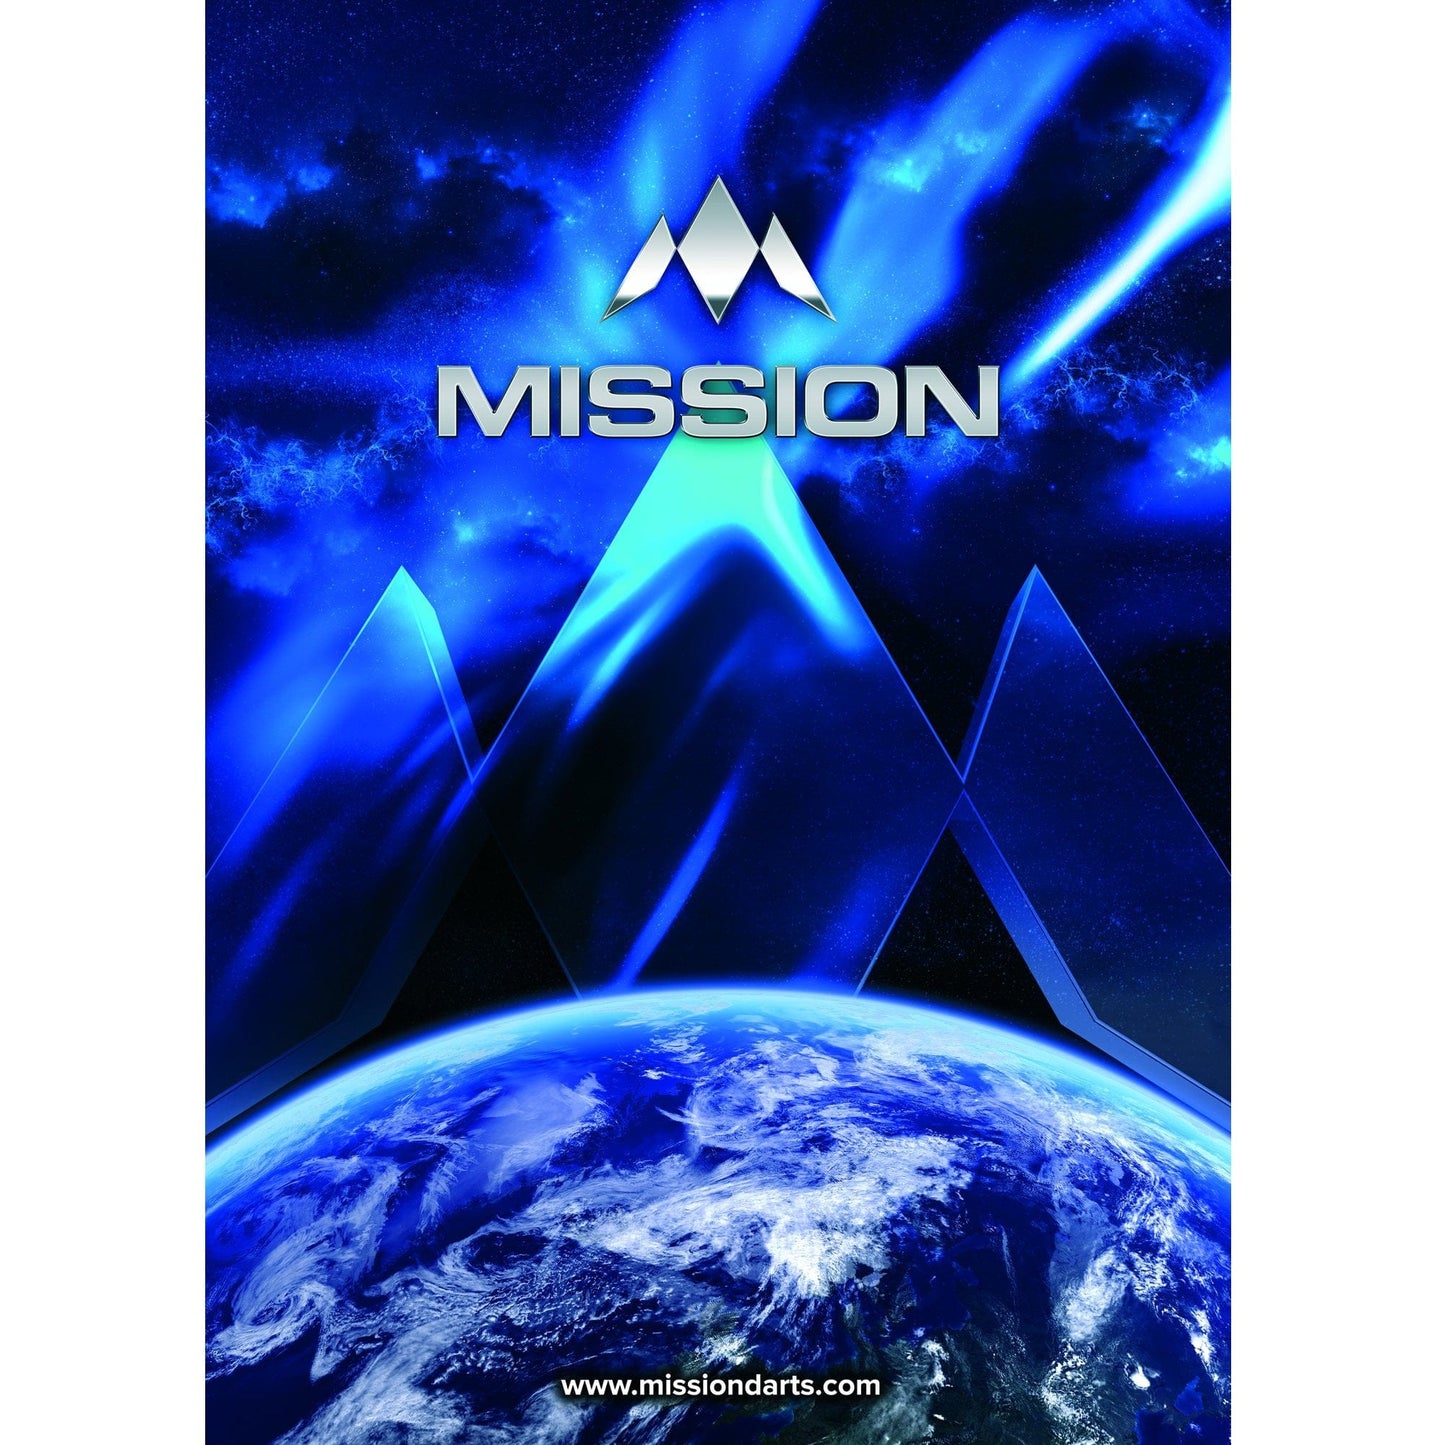 Mission Darts - Poster - A2 - 594mm x 420mm - Earth